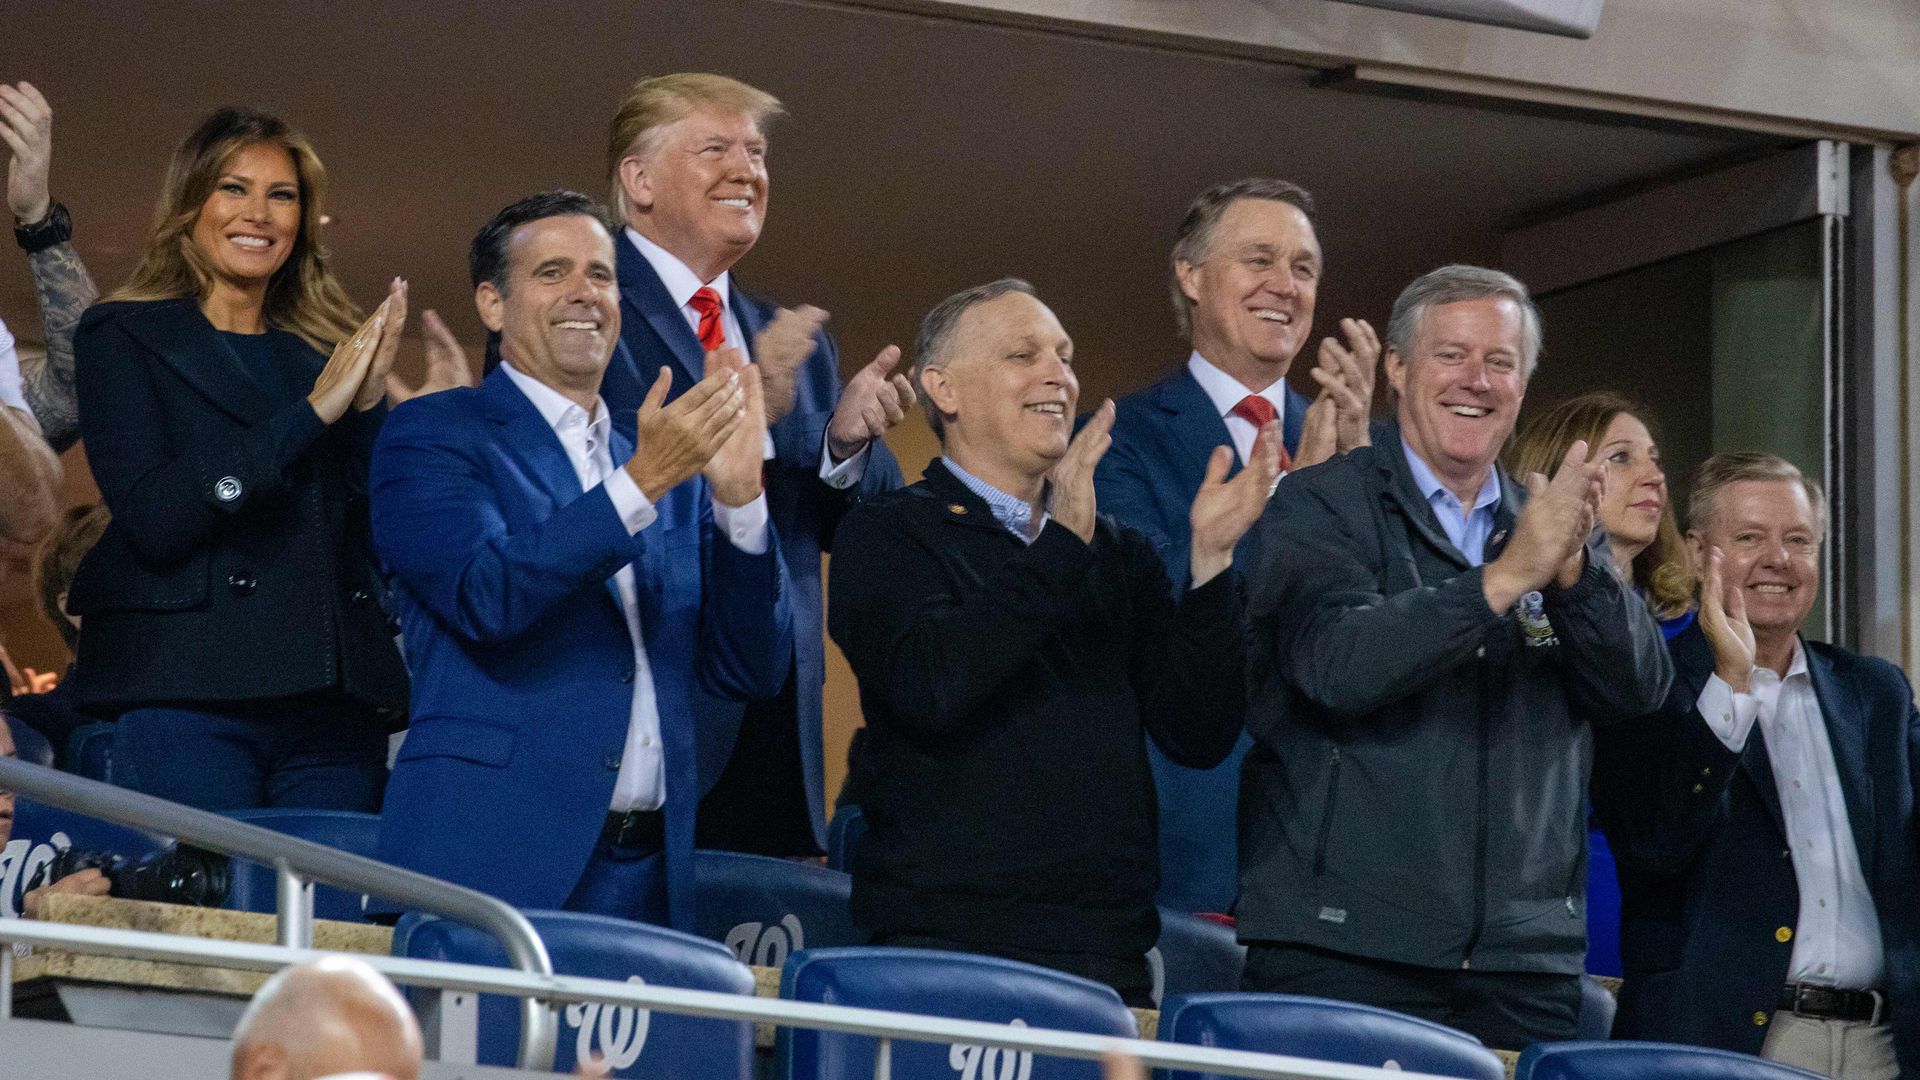 US President Donald Trump (C) and First Lady Melania Trump (2L) with Republican lawmakers during the World Series between the Washington Nationals and Houston Astros 